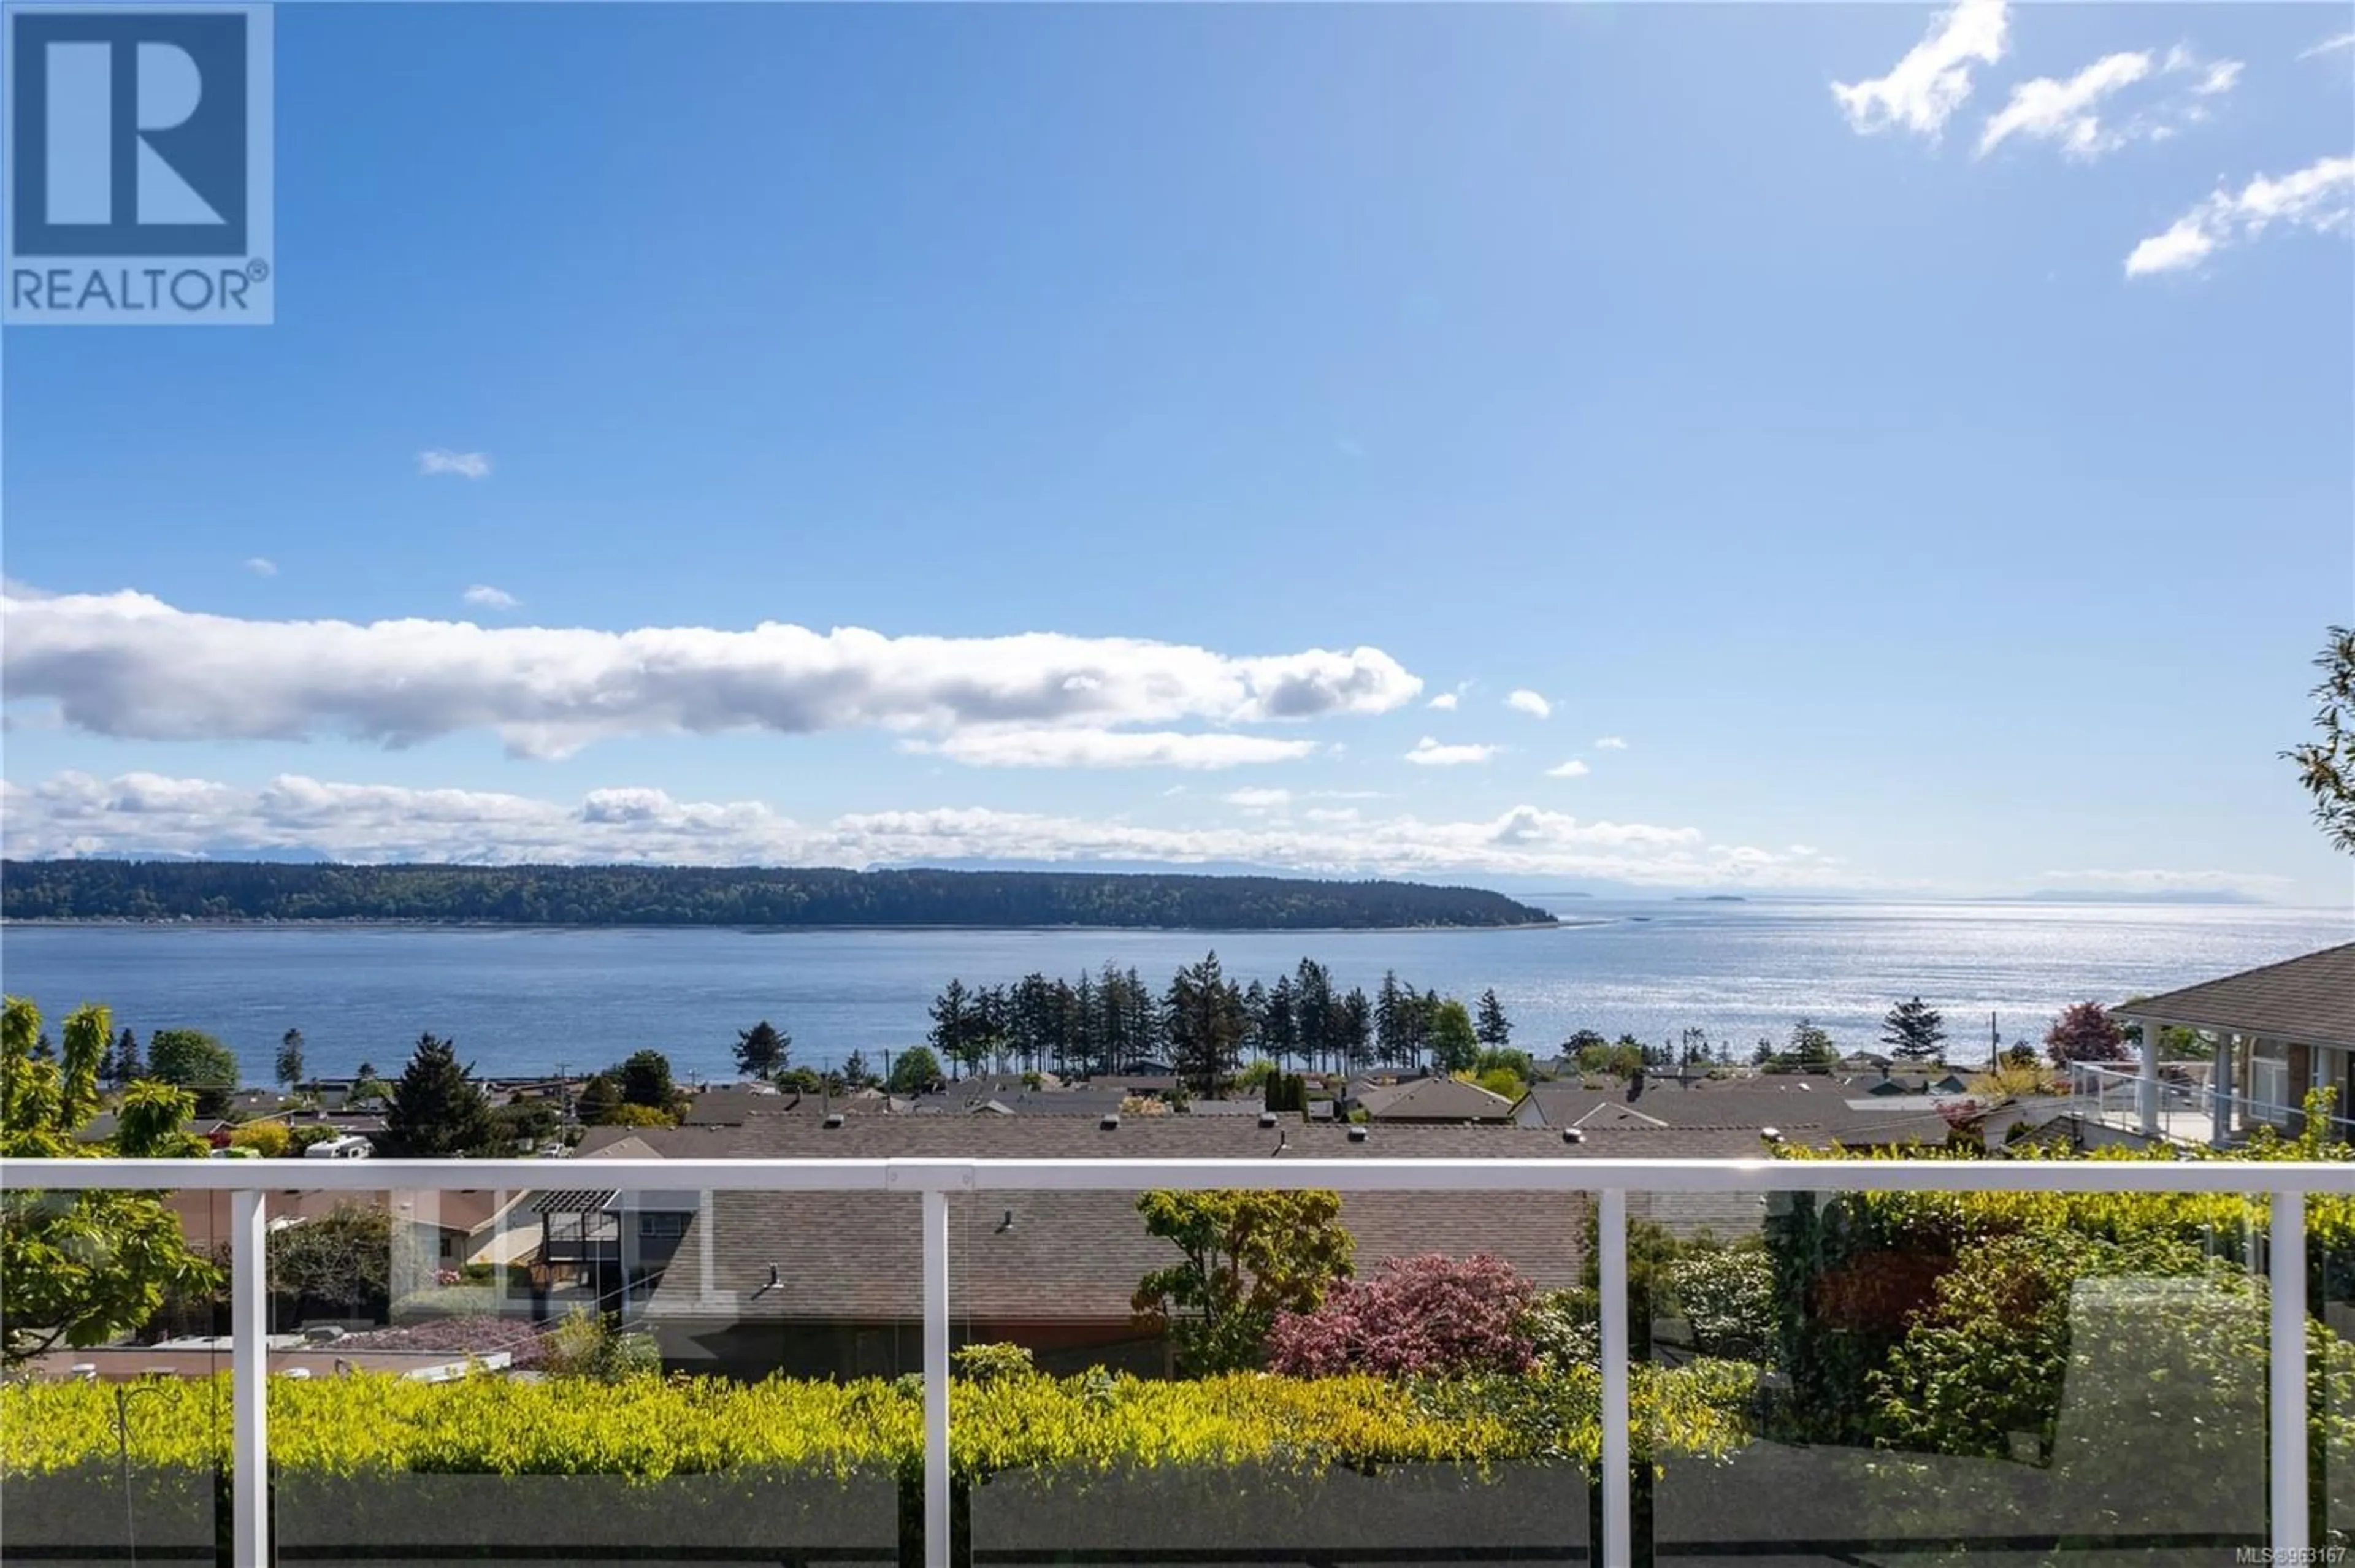 Lakeview for 227 Alder St S, Campbell River British Columbia V9W2M9